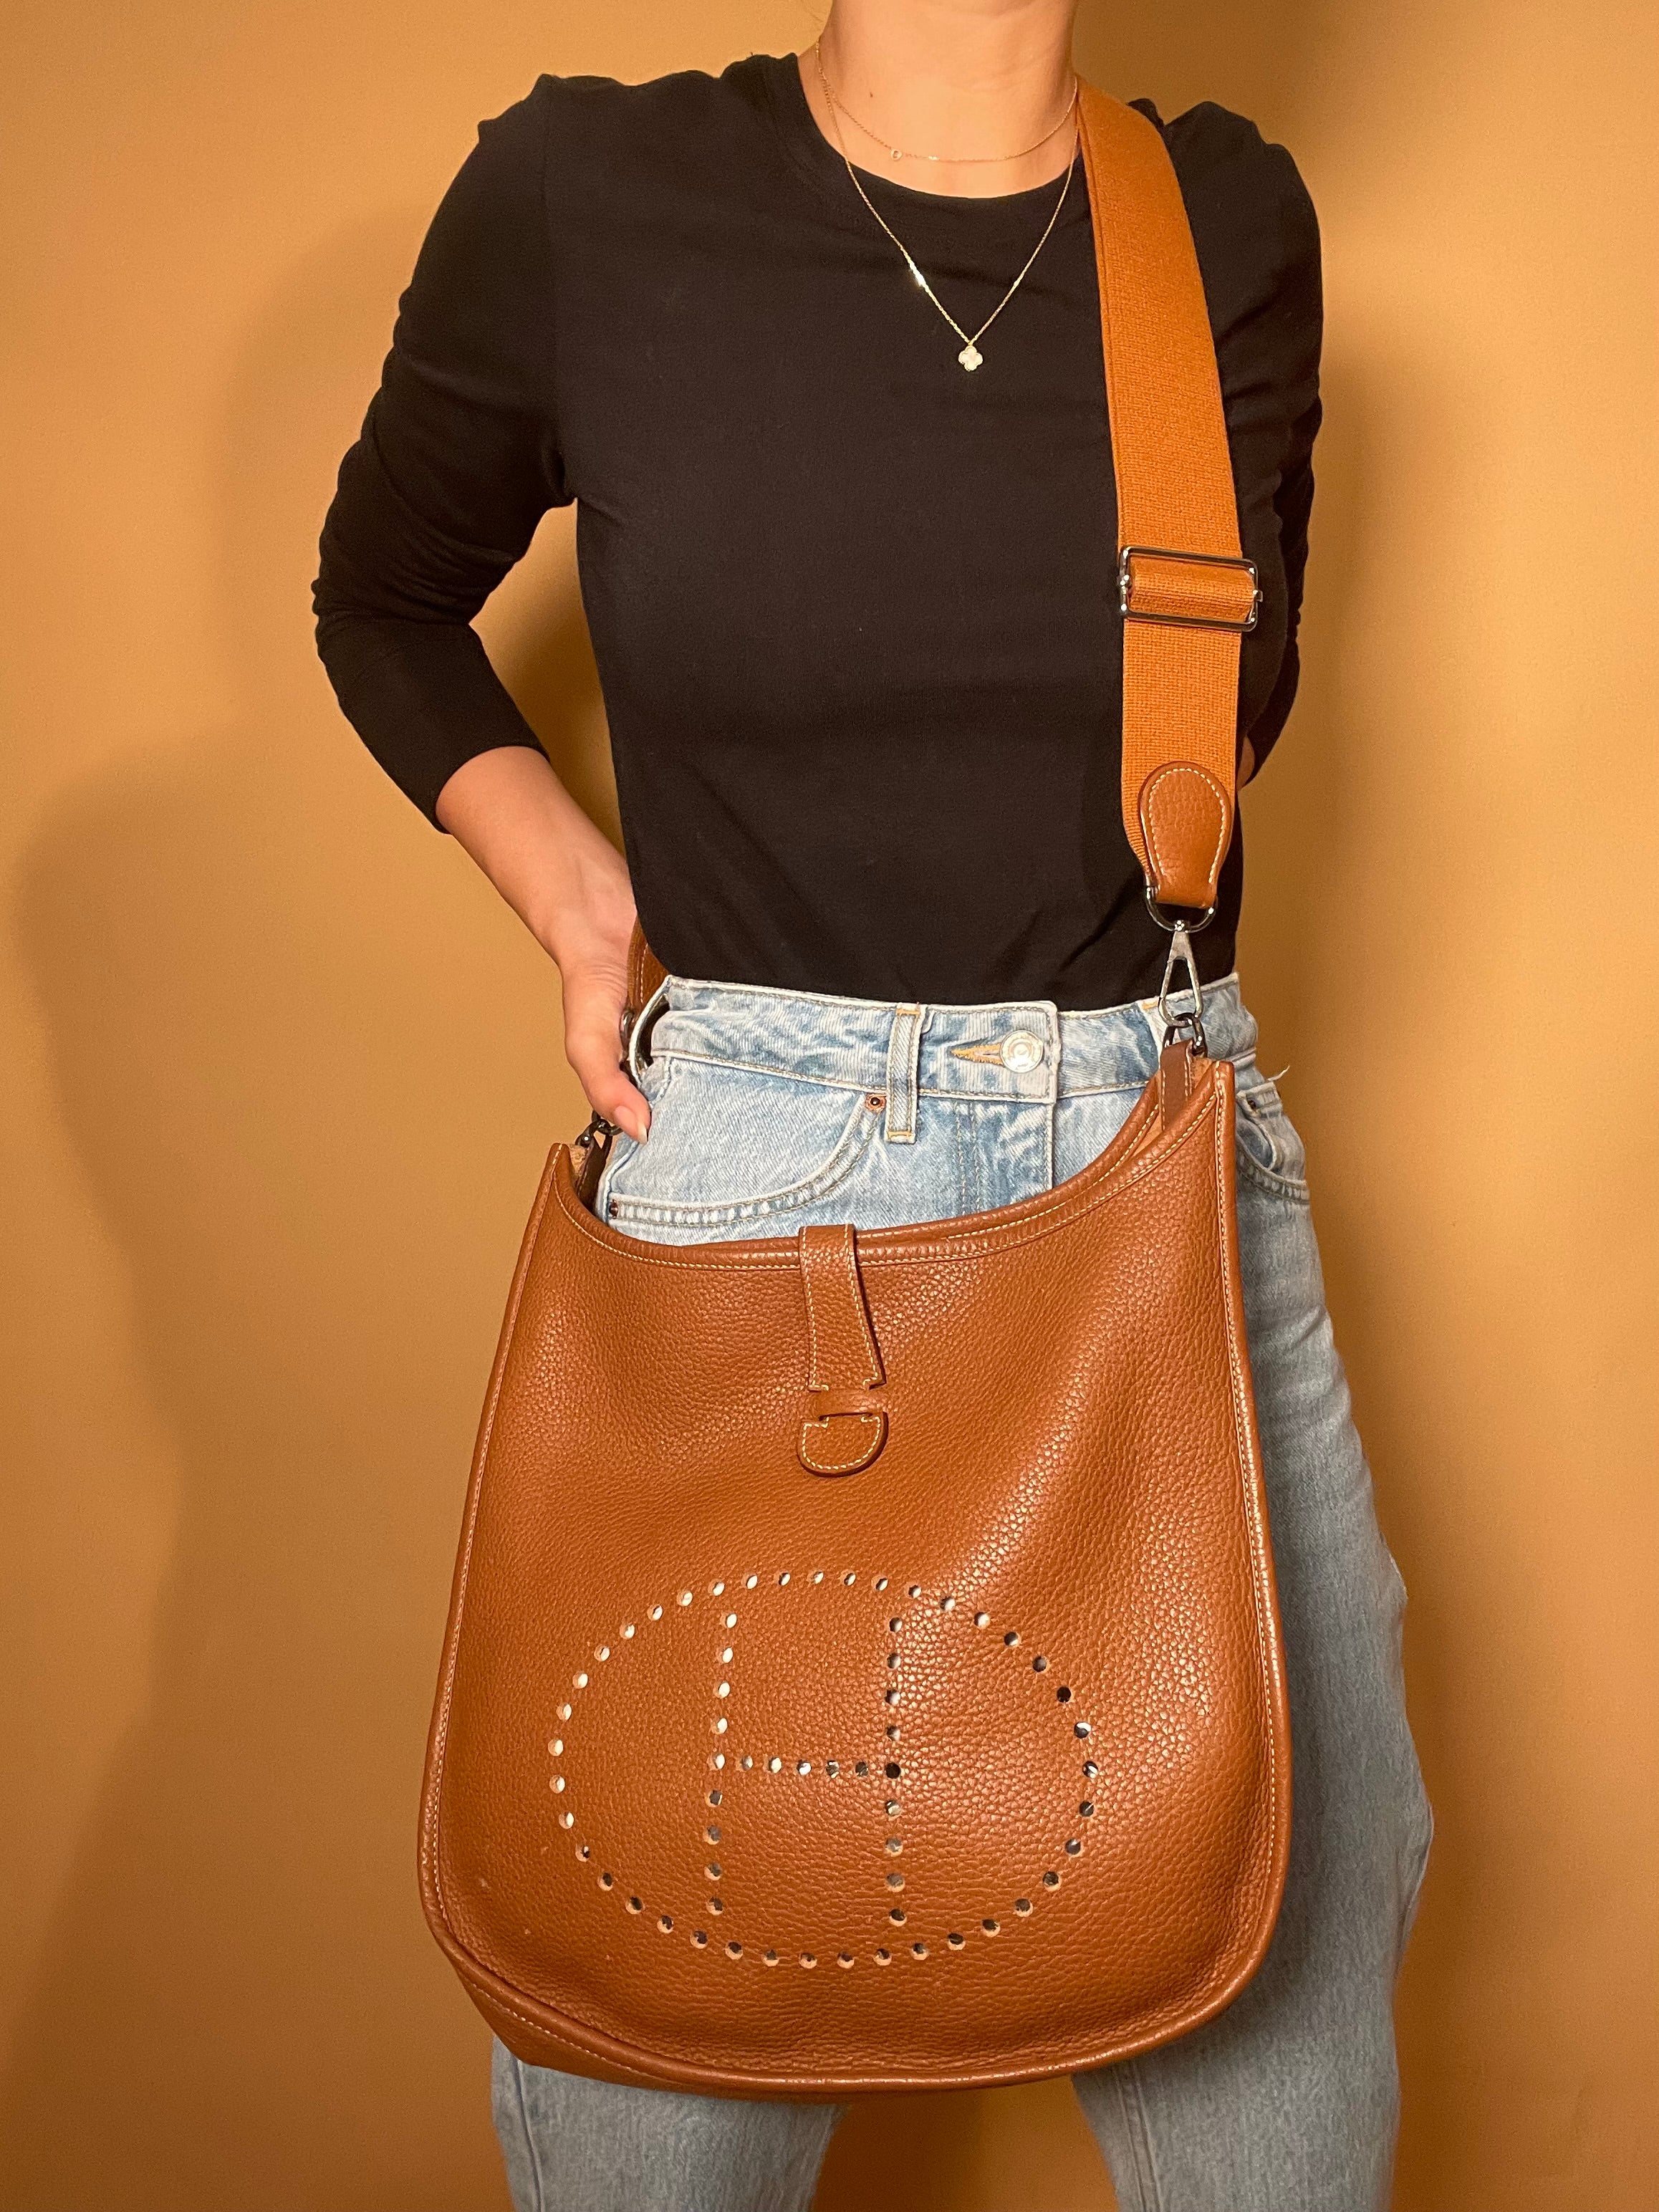 Evelyne 29 bag in brown leather